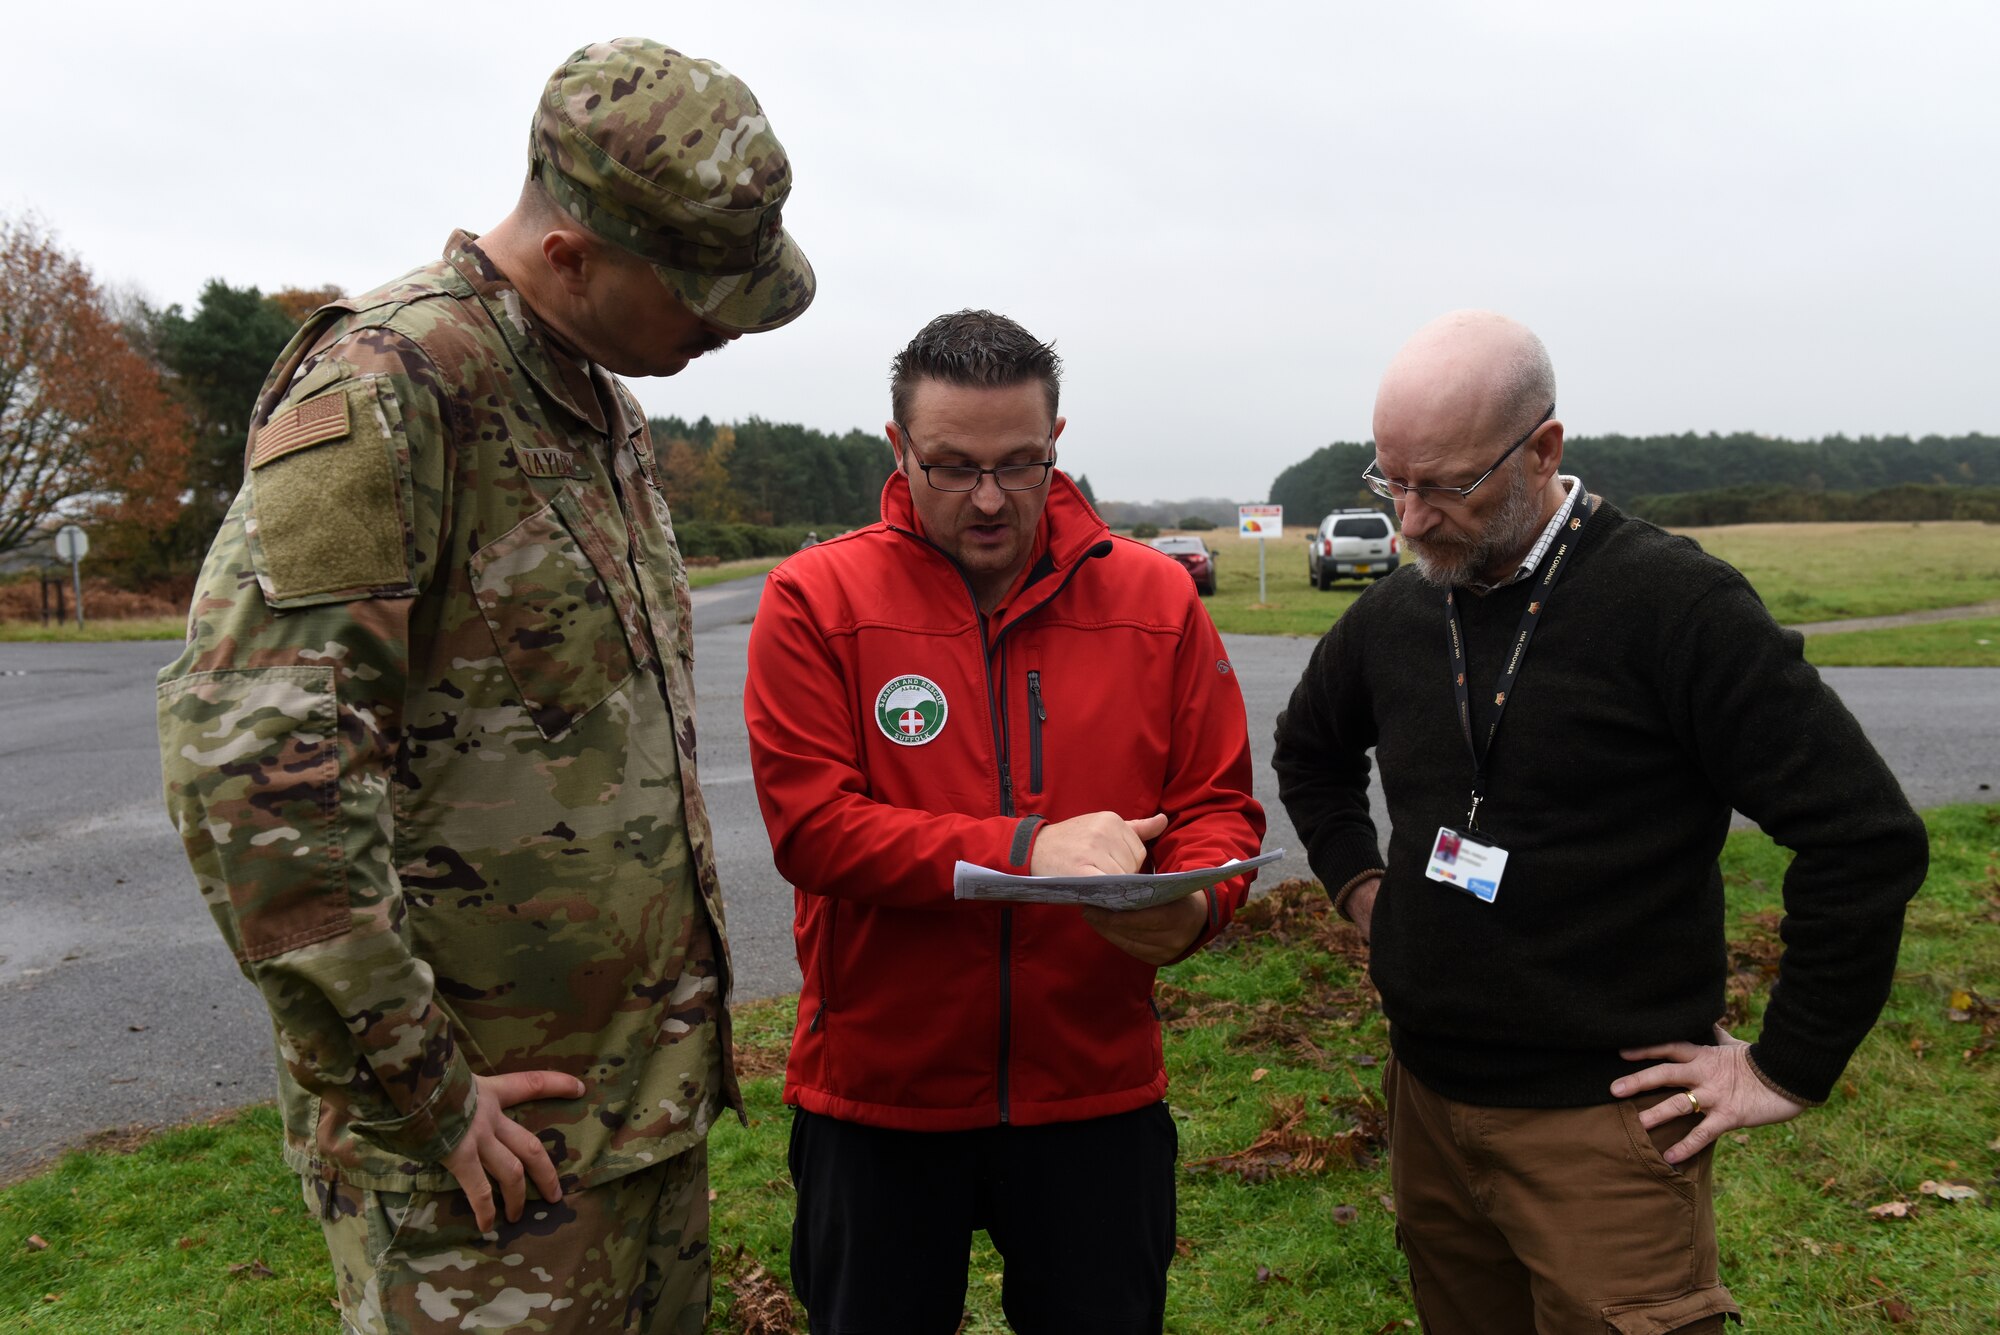 Maj. Gregory Taylor, assigned to the 48th Medical Group at Royal Air Force Lakenheath, England, coordinate plans in Thetford, England, Nov. 23, 2019. The SuLSAR event allowed U.S. Air Force medics the opportunity to build a stronger partnership working alongside emergency responders. (U.S. Air Force photo by Airman 1st Class Rhonda Smith)